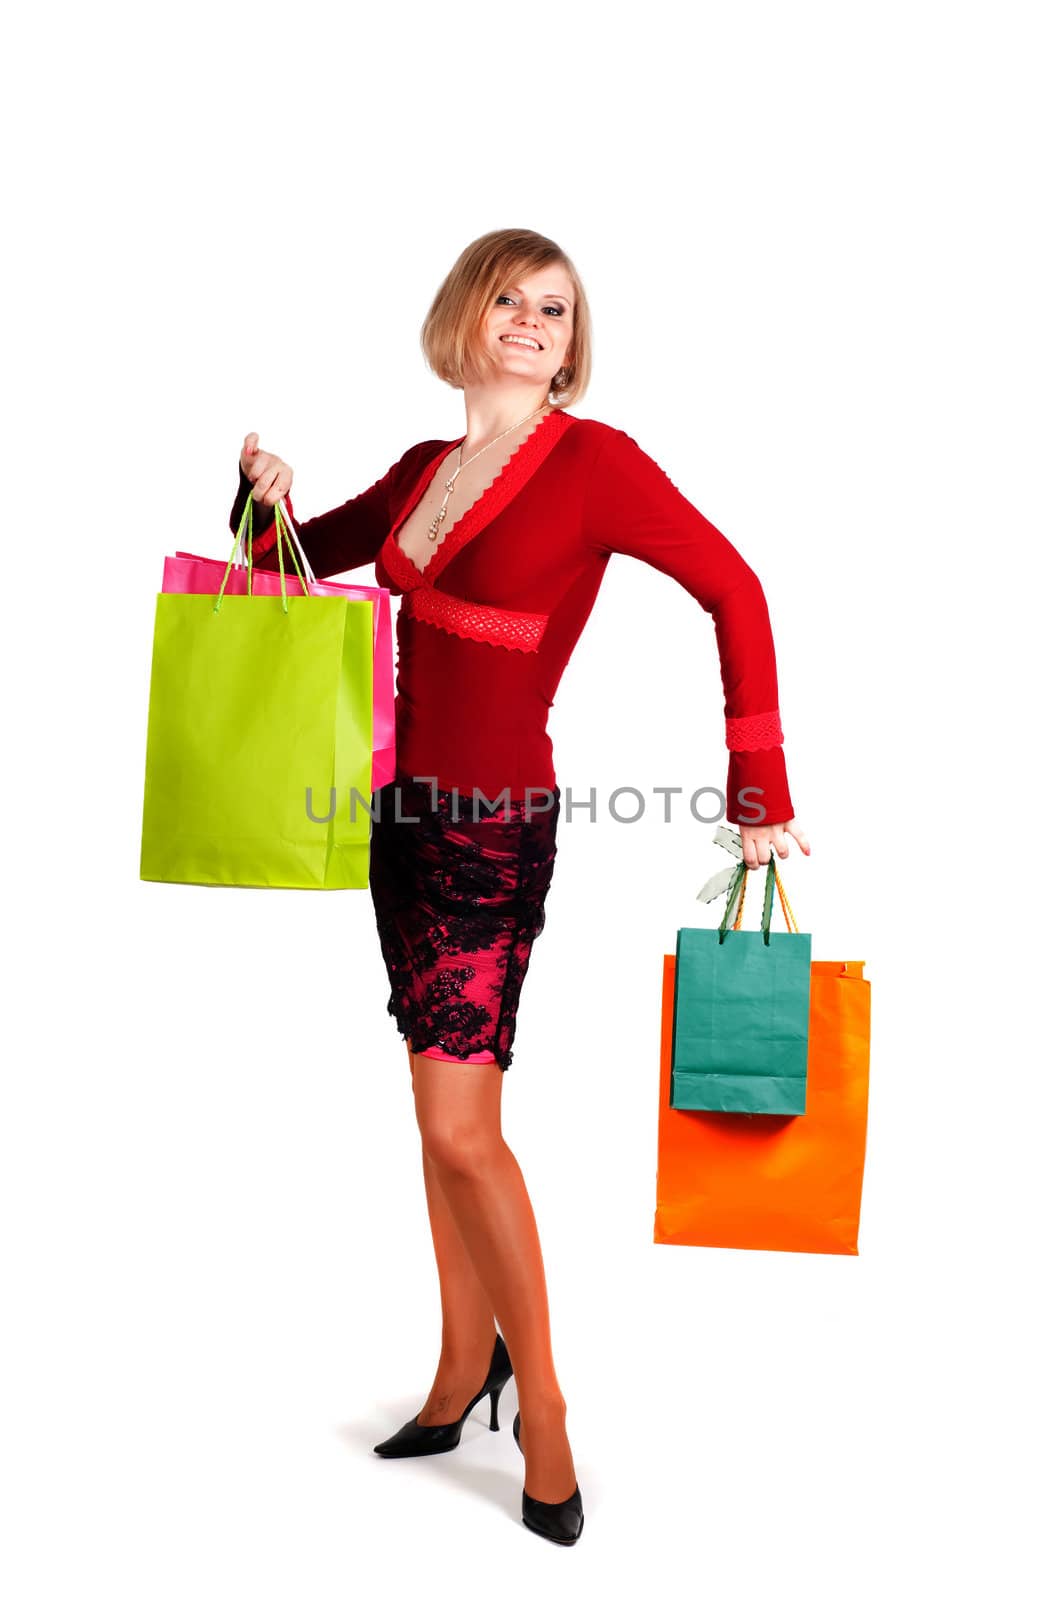 Beautiful woman in red with shopping bags by anytka